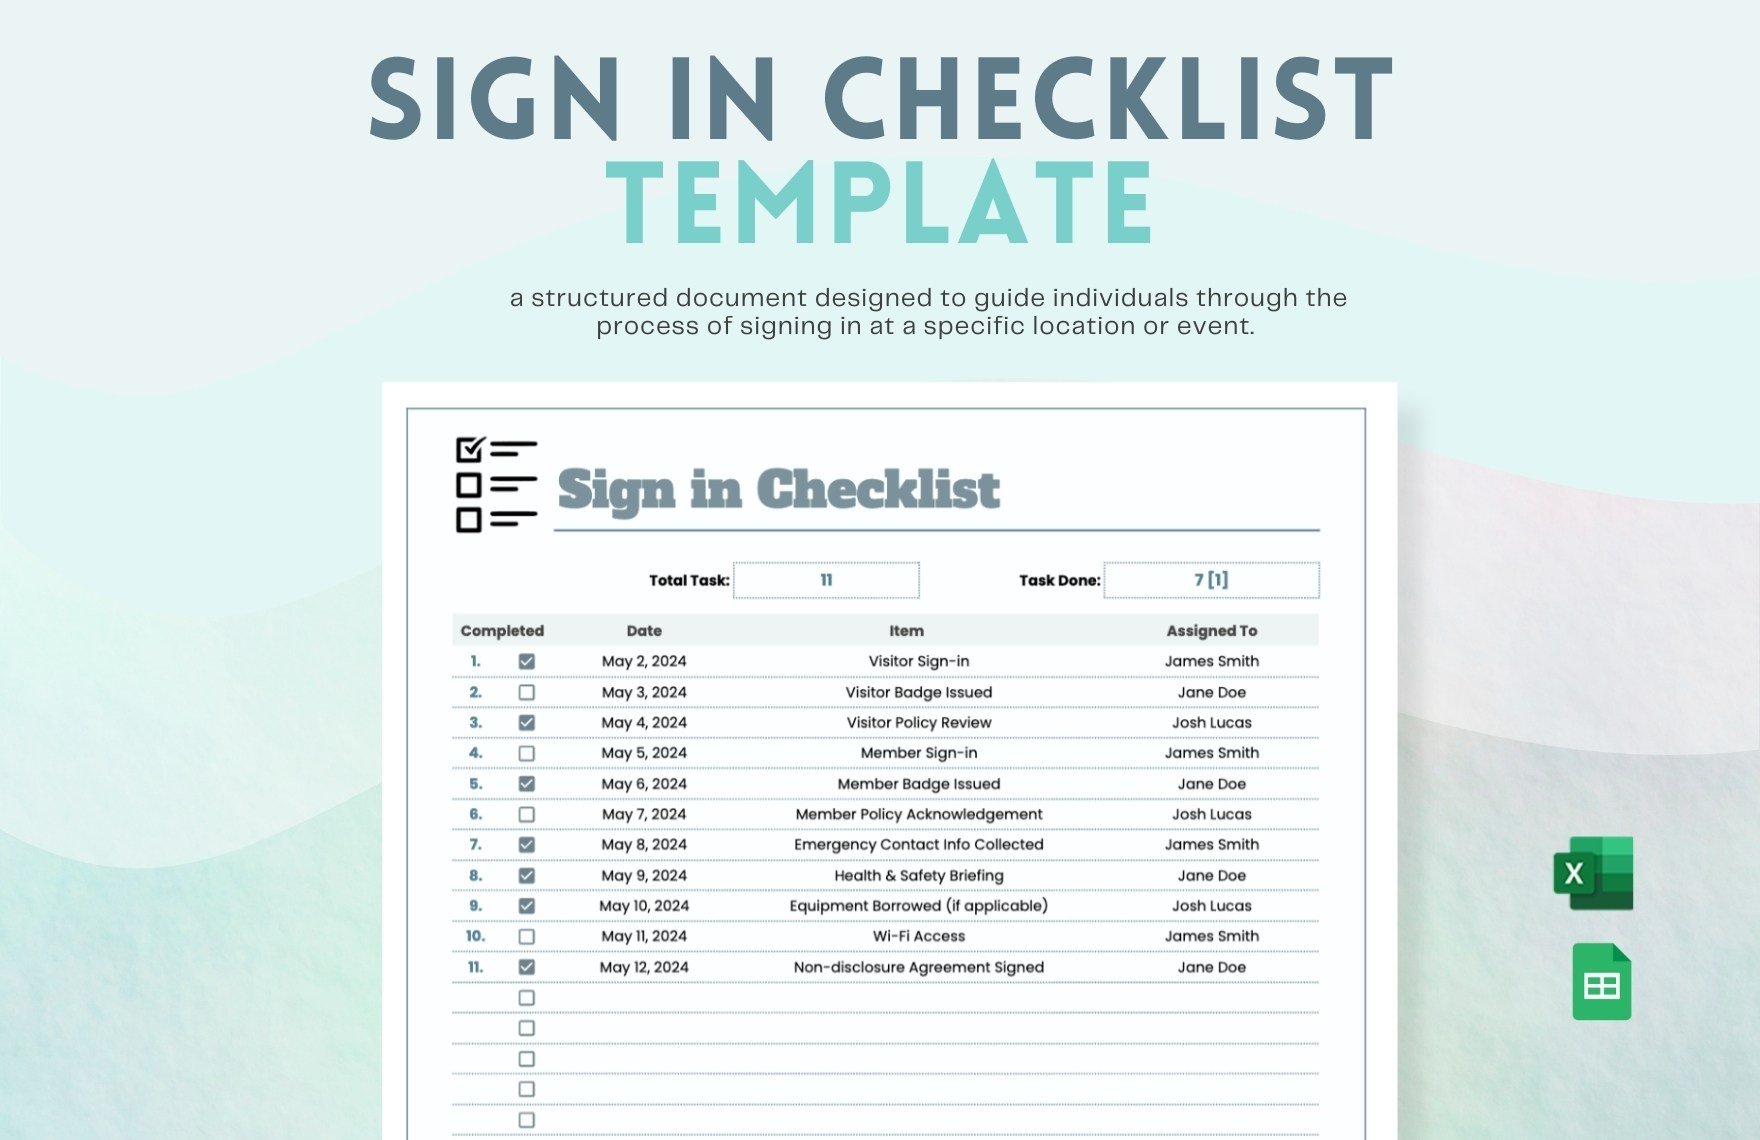 Sign in Checklist Template in Excel, Google Sheets